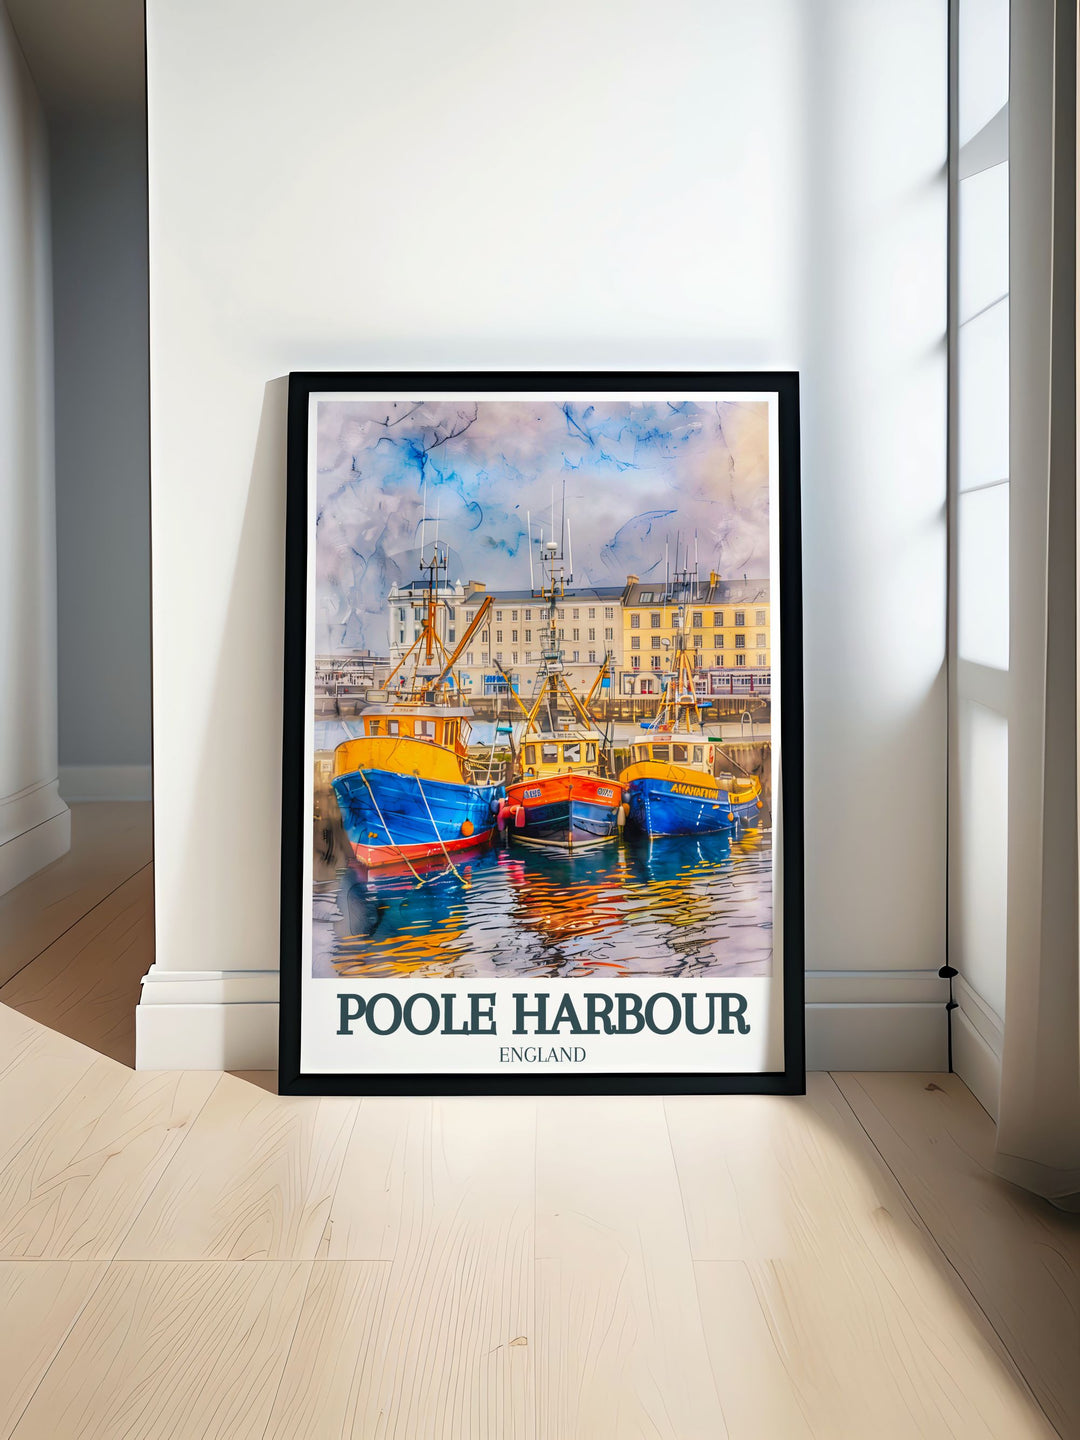 England Poole Harbour poster featuring a serene view of Borough of Poole Holes Bay perfect for adding a touch of elegance to any home decor an ideal gift for travel lovers showcasing Englands stunning maritime scenery